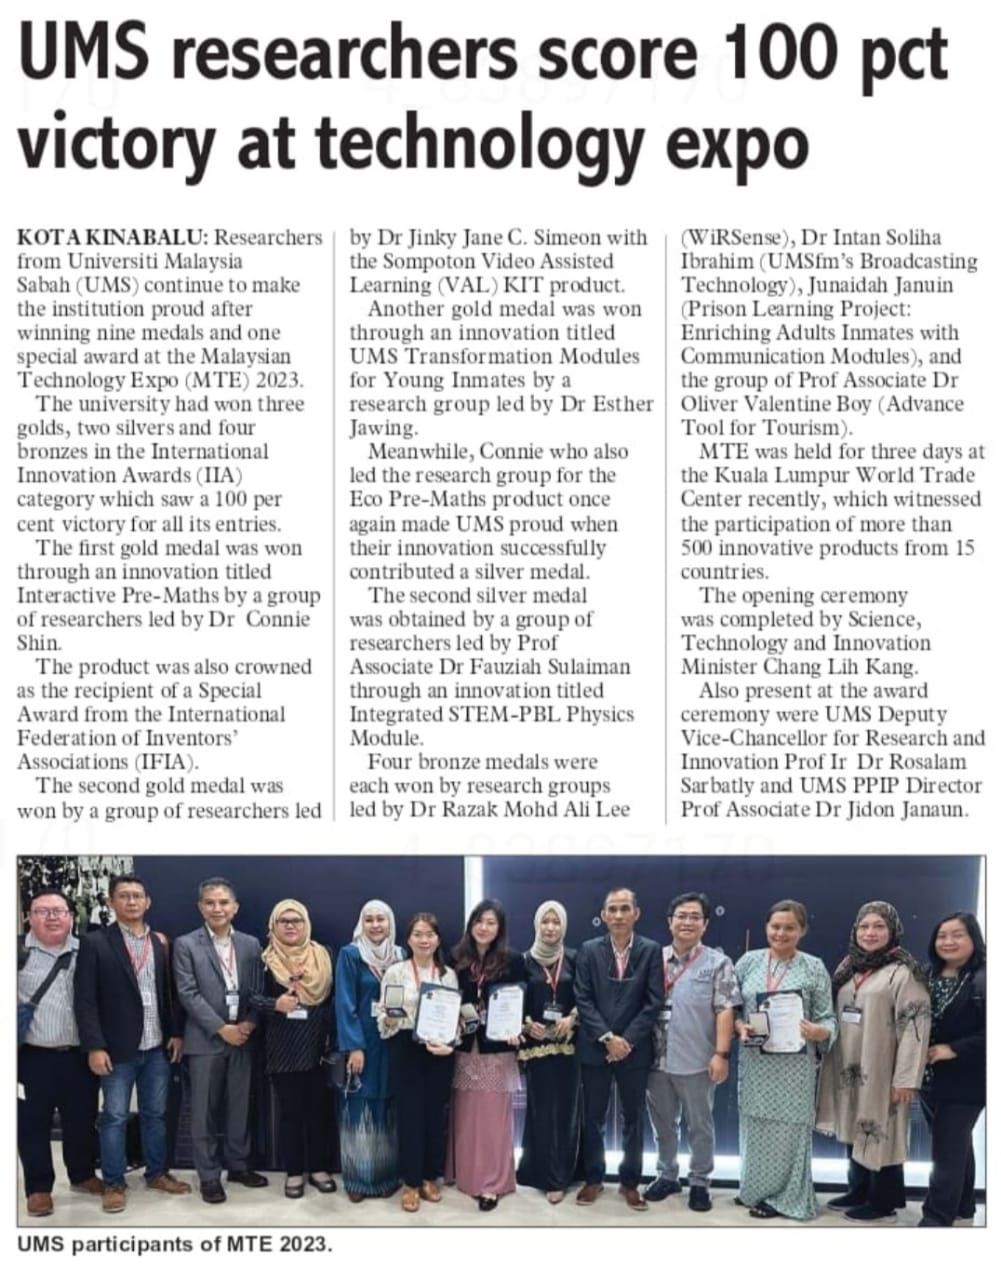 UMS RESEARCHERS SCORE 100 PCT VICTORY AT TECHNOLOGY EXPO